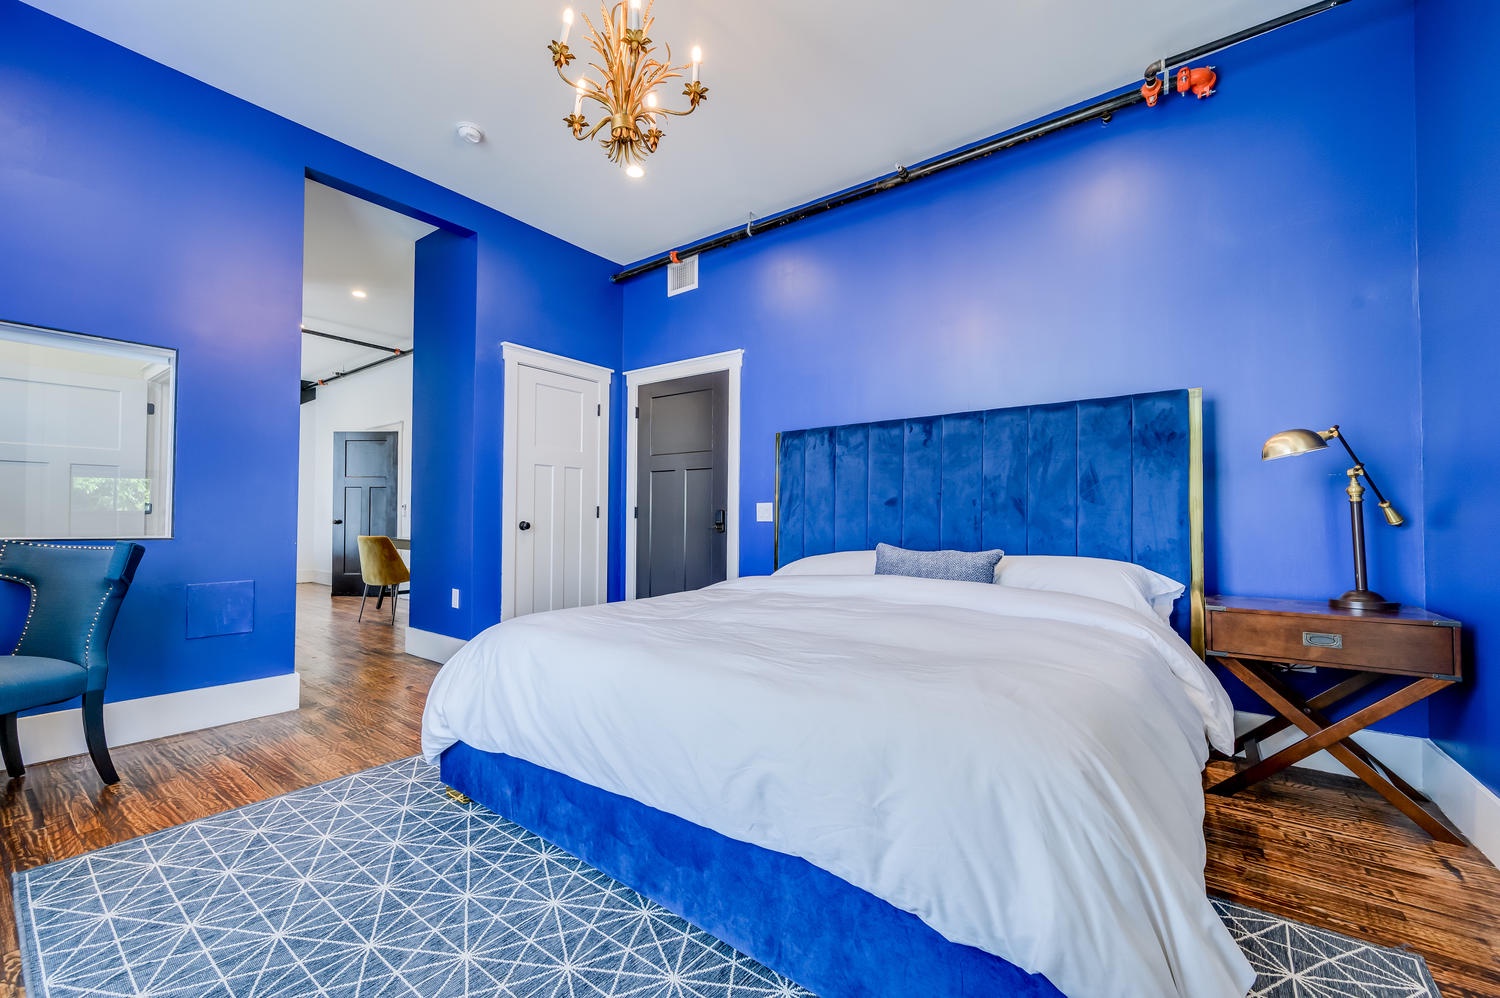 Suite 102 – The 1st Floor Blue Kusama Suite offers King and Queen Casper Beds, Smart TV, Patio Access, and private Bathroom